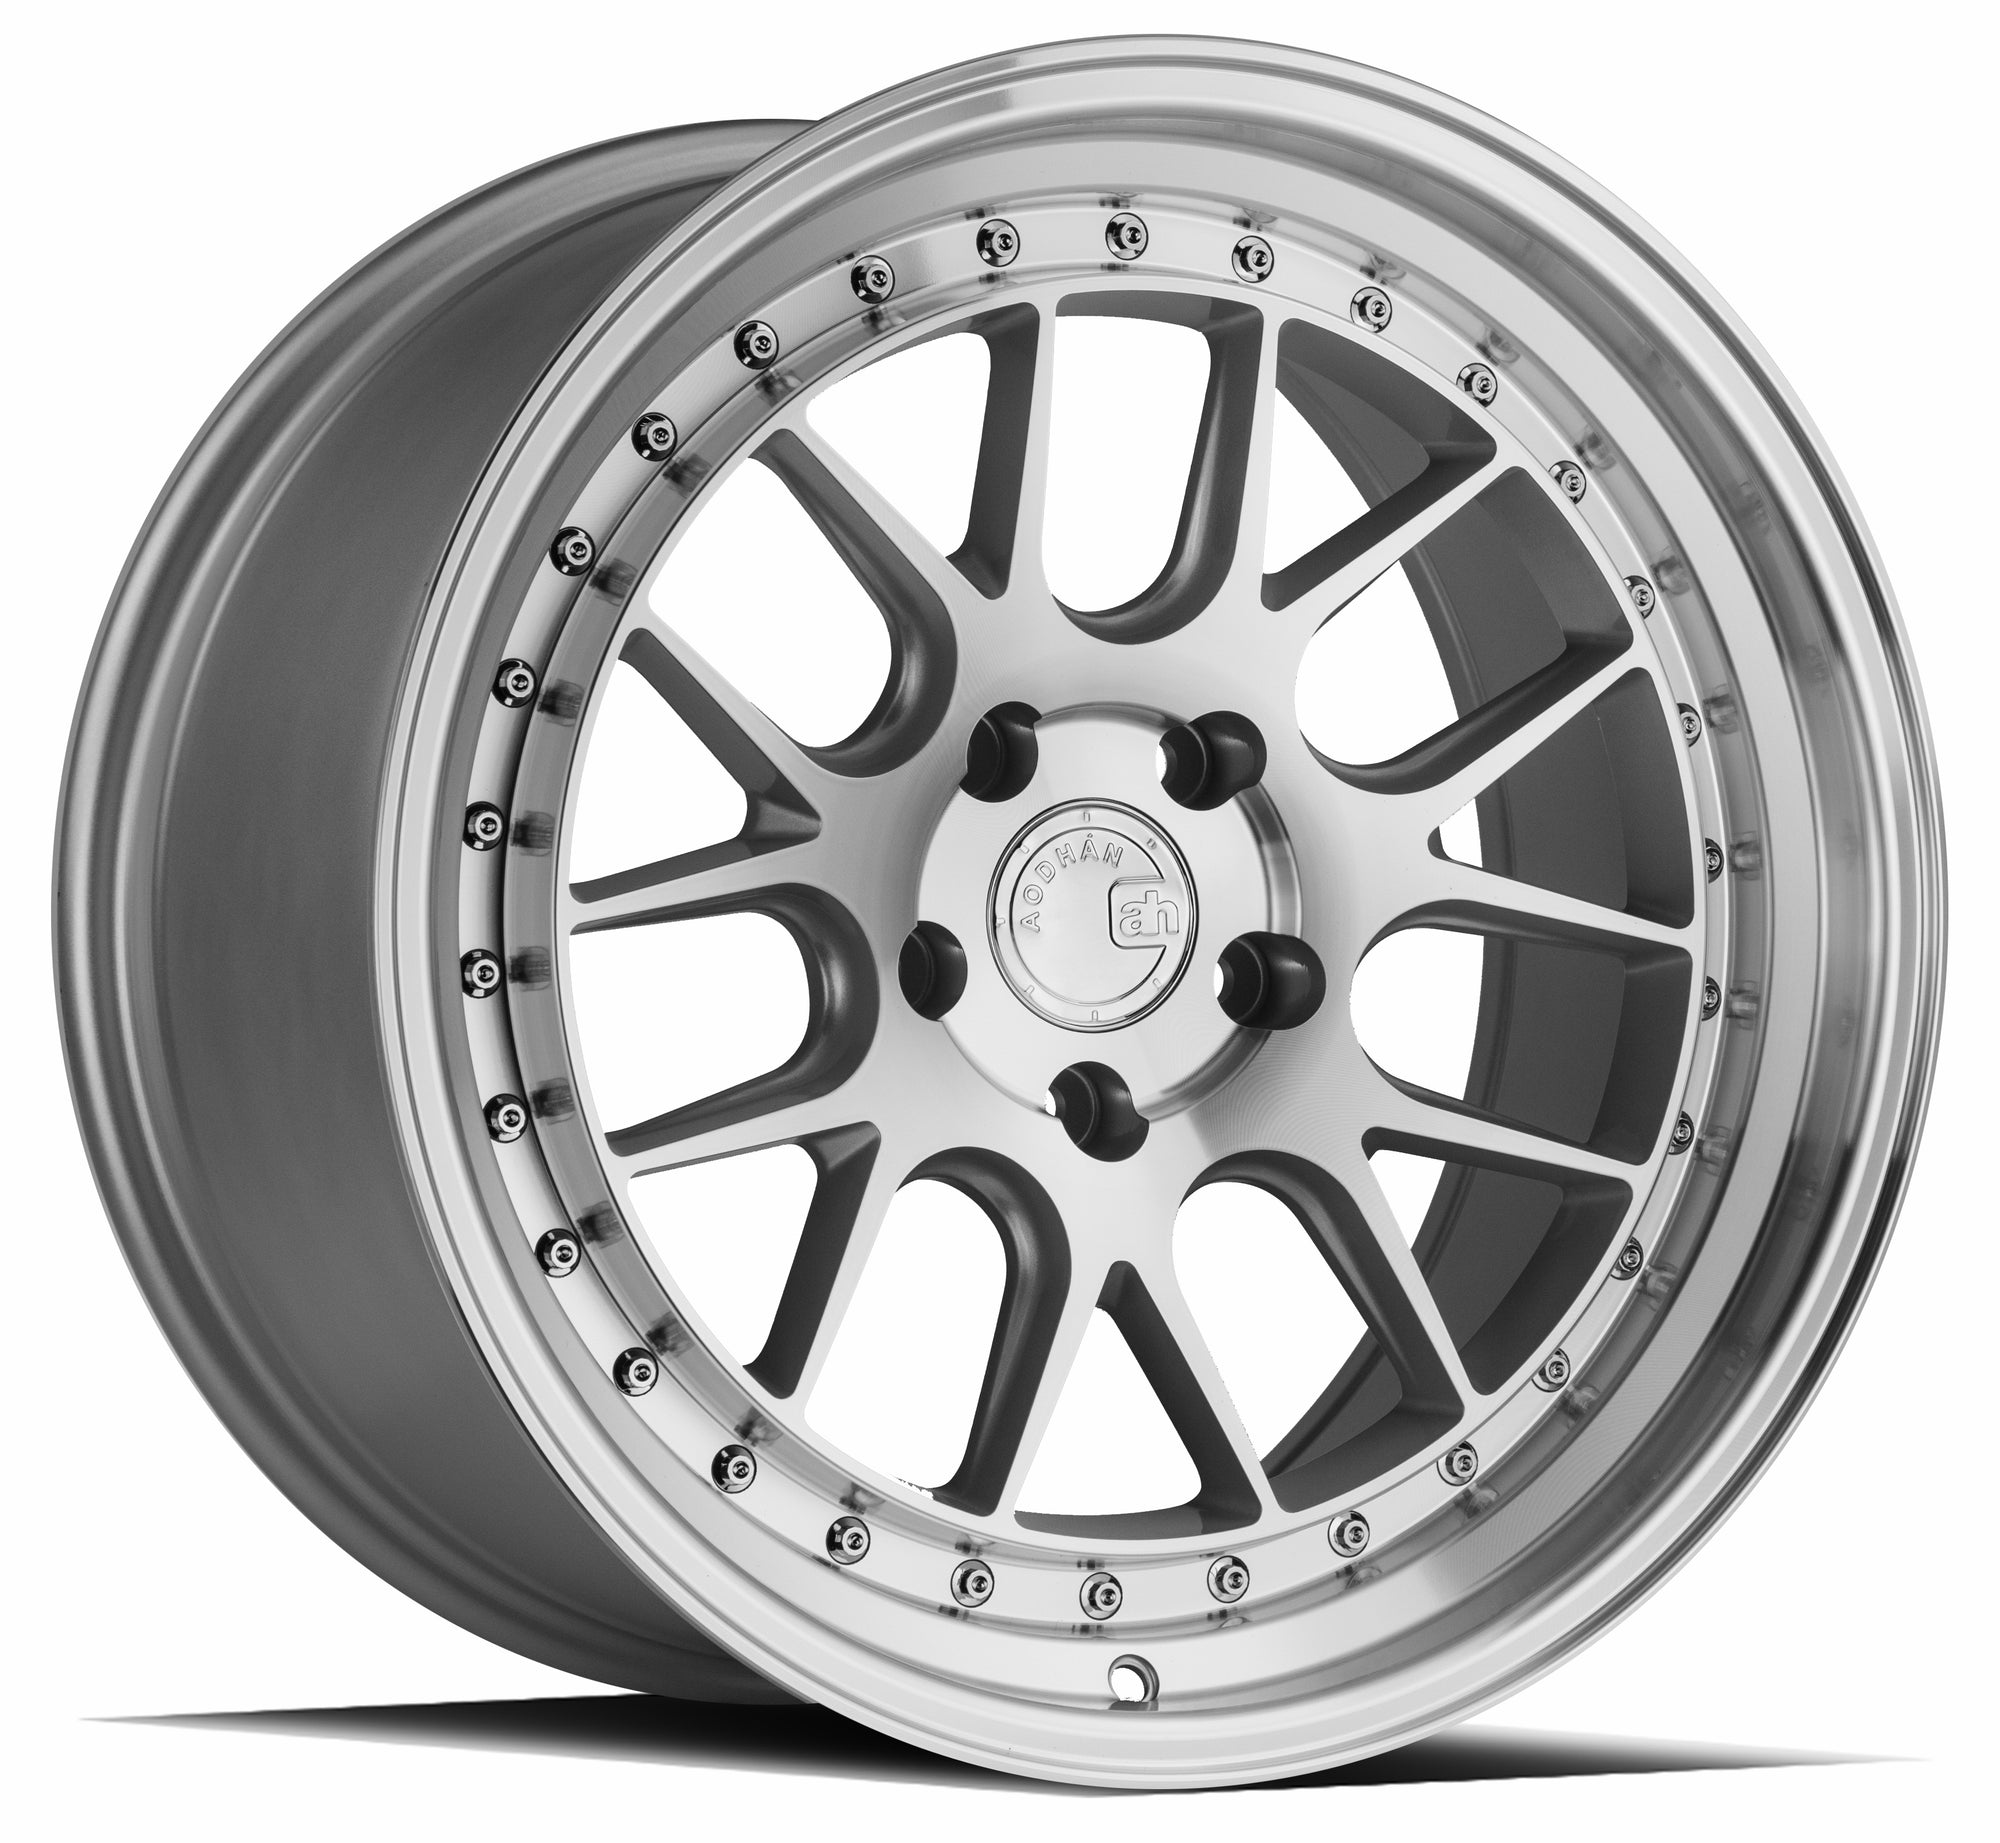 Aodhan DS06 19x9.5 5x114.3 +15 Silver w/Machined Face